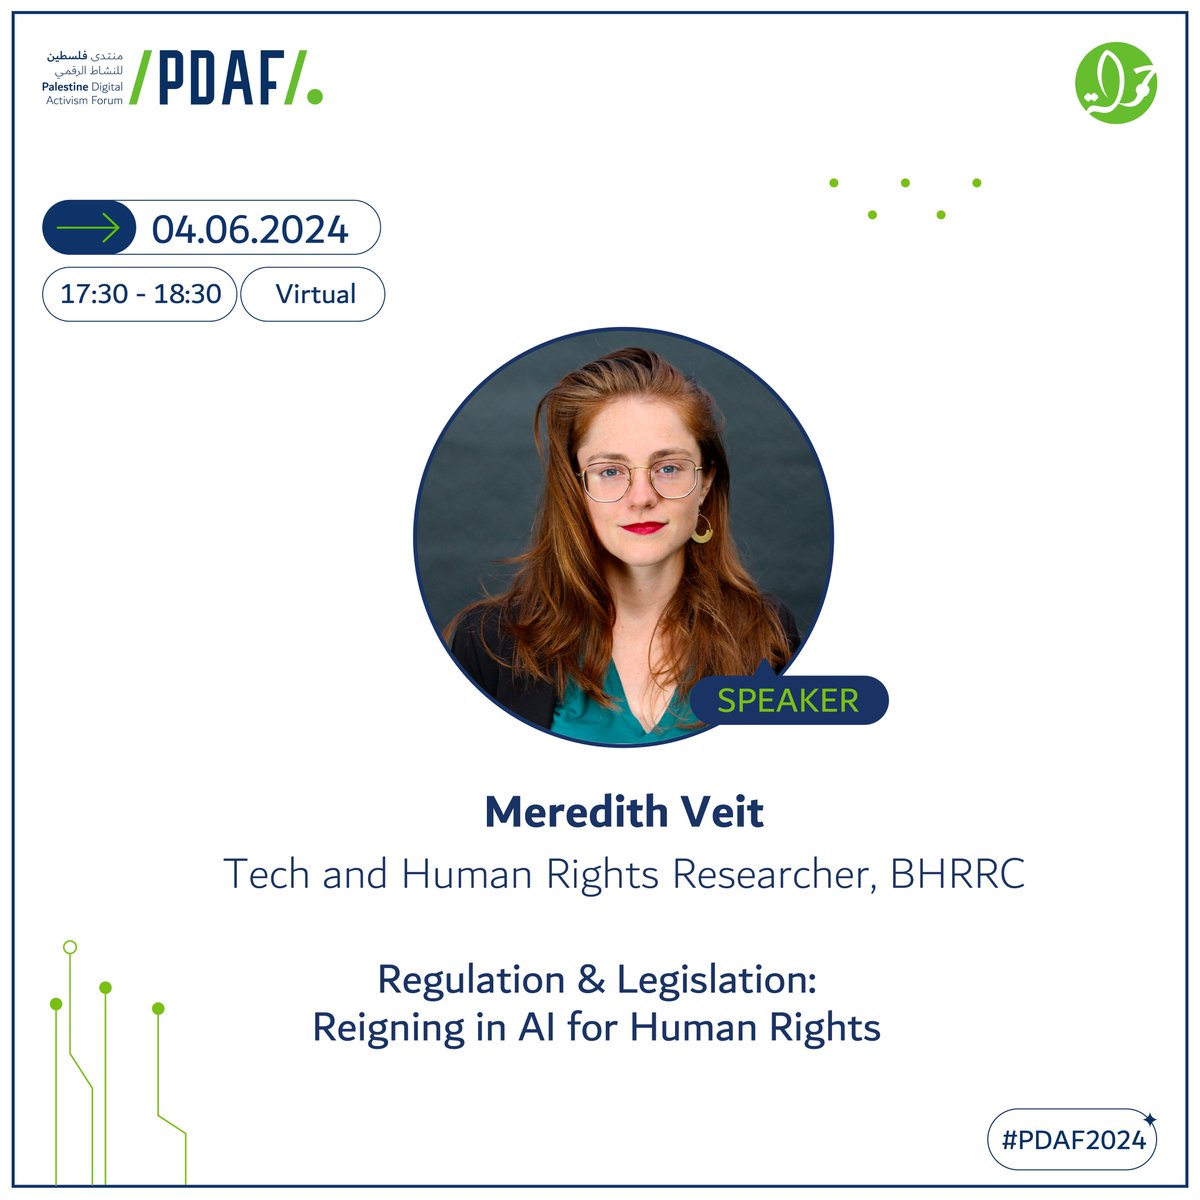 📢Join Meredith Veit, one of the speakers in the session: “Regulation & Legislation: Reigning in AI for Human Rights” Reserve your seat now: pdaf.net #PDAF2024